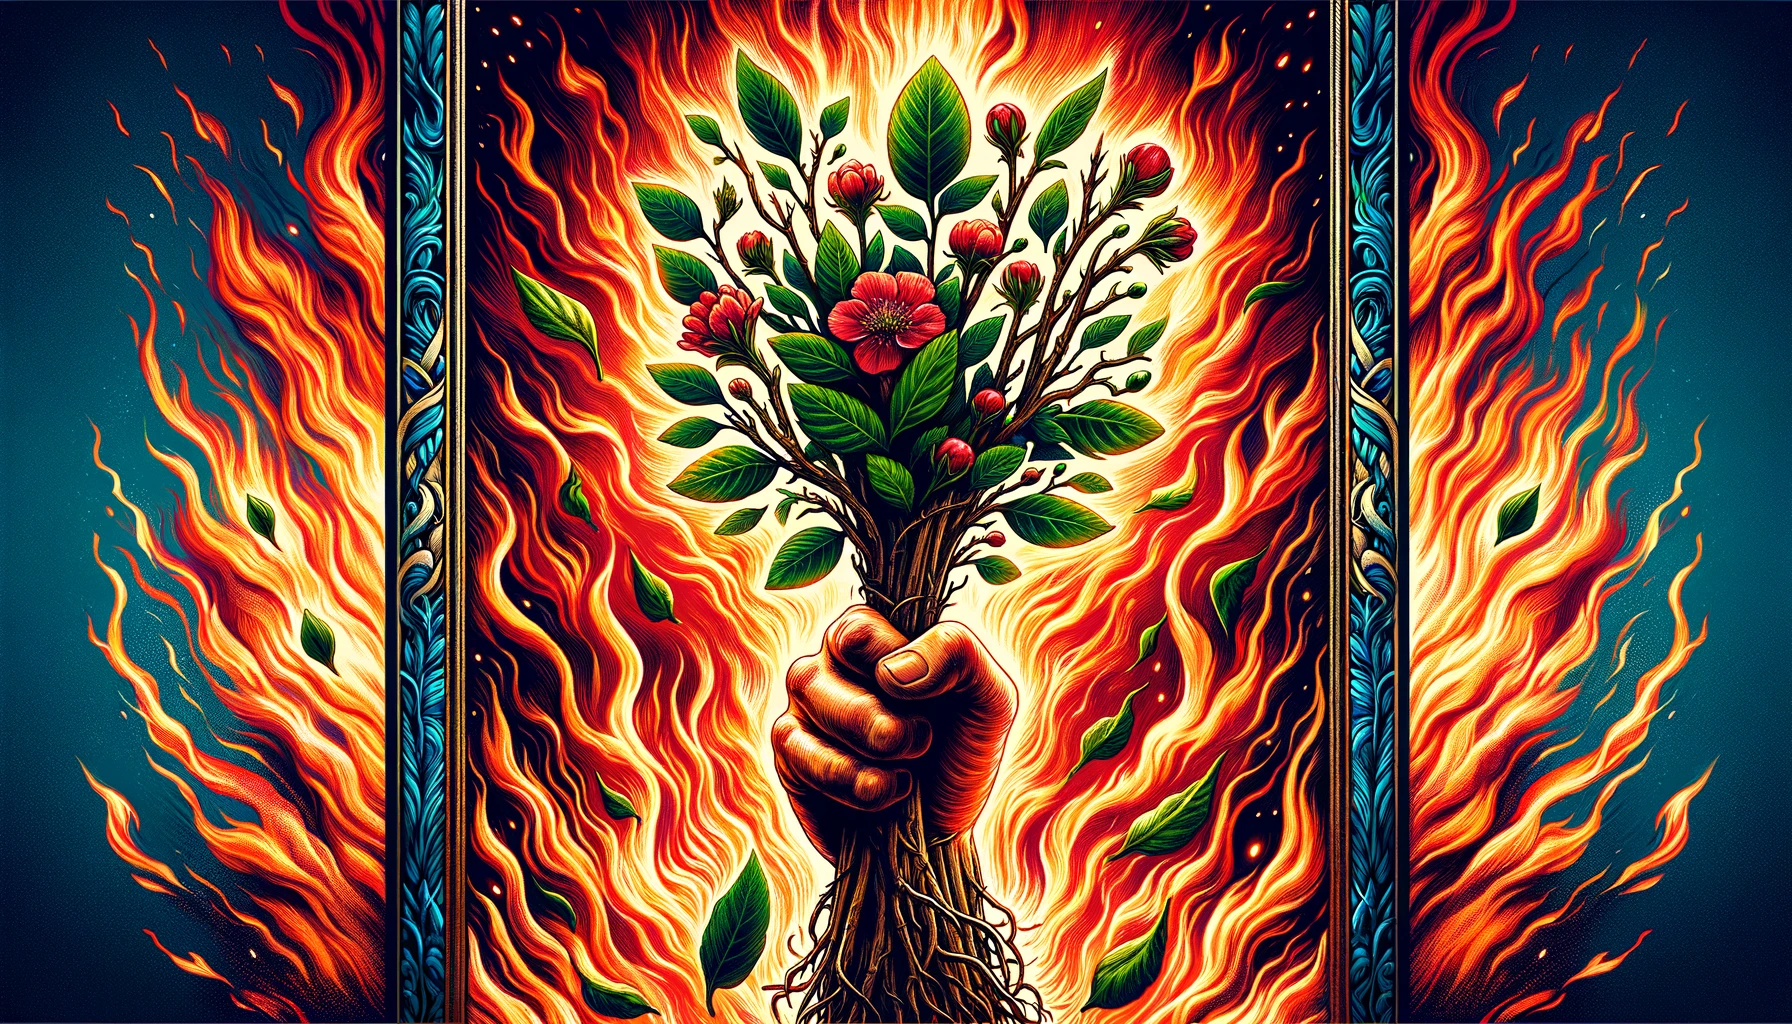 a 169 image showcasing the Ace of Wands tarot card The central element should be a hand emerging from a fiery inferno gripping a flourishing wand This wand is adorned with buddi